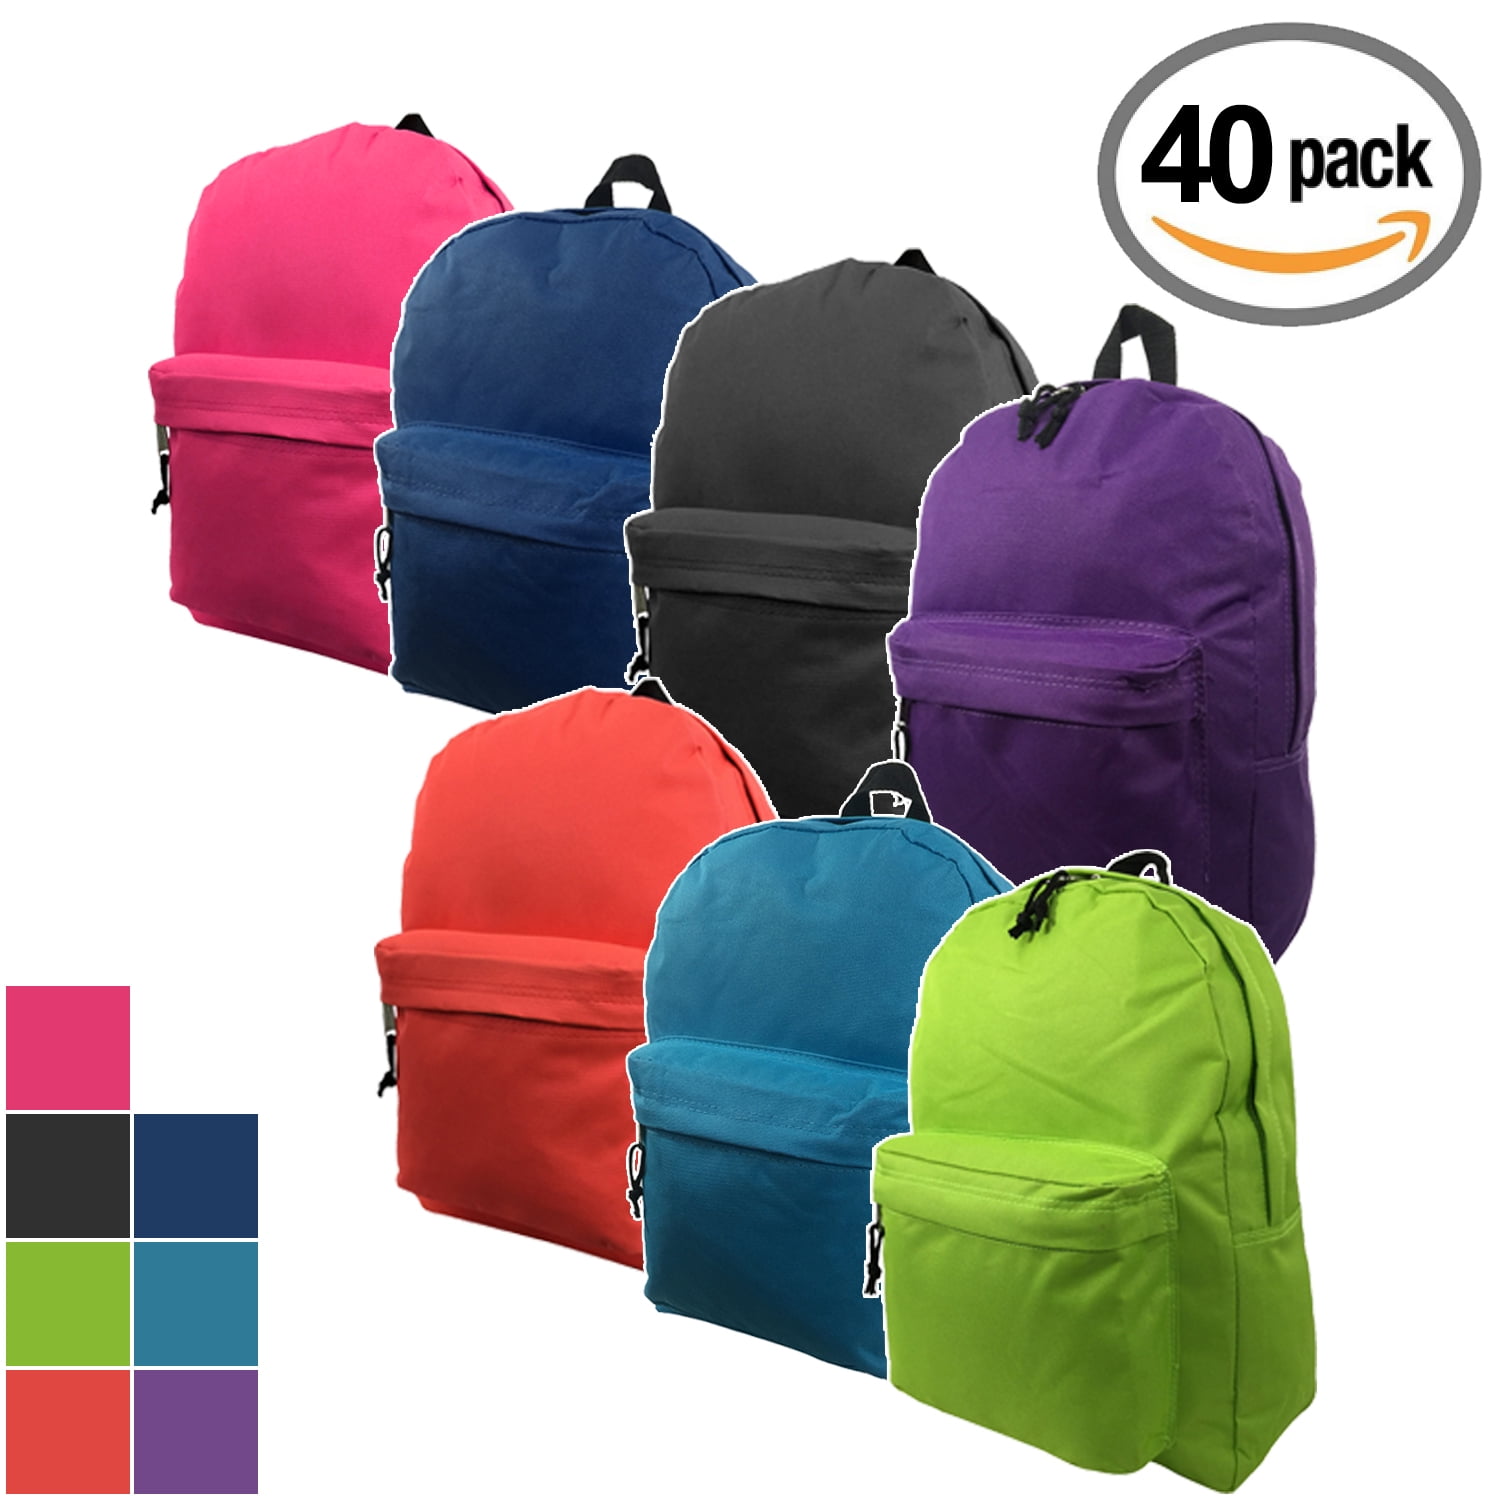 Shop For Wholesale Cheap Book Bags At Affordable Prices - Alibaba.com